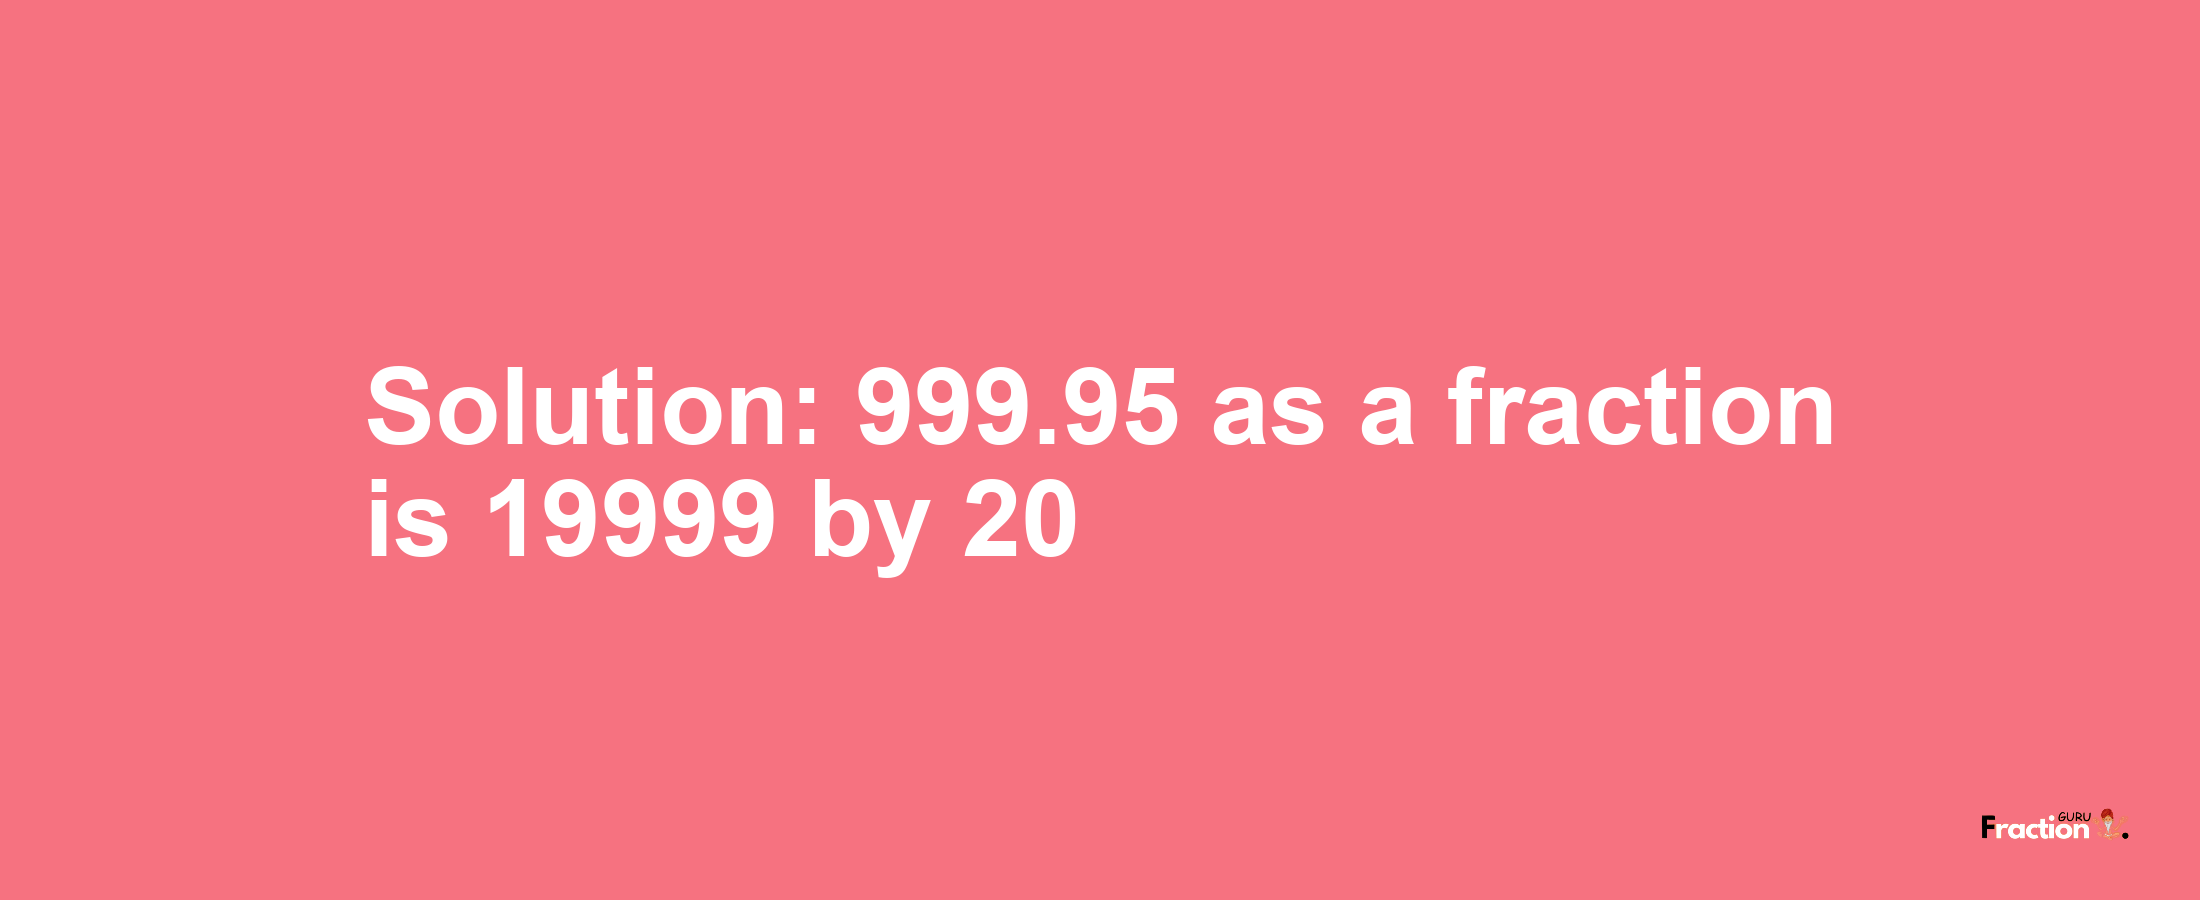 Solution:999.95 as a fraction is 19999/20